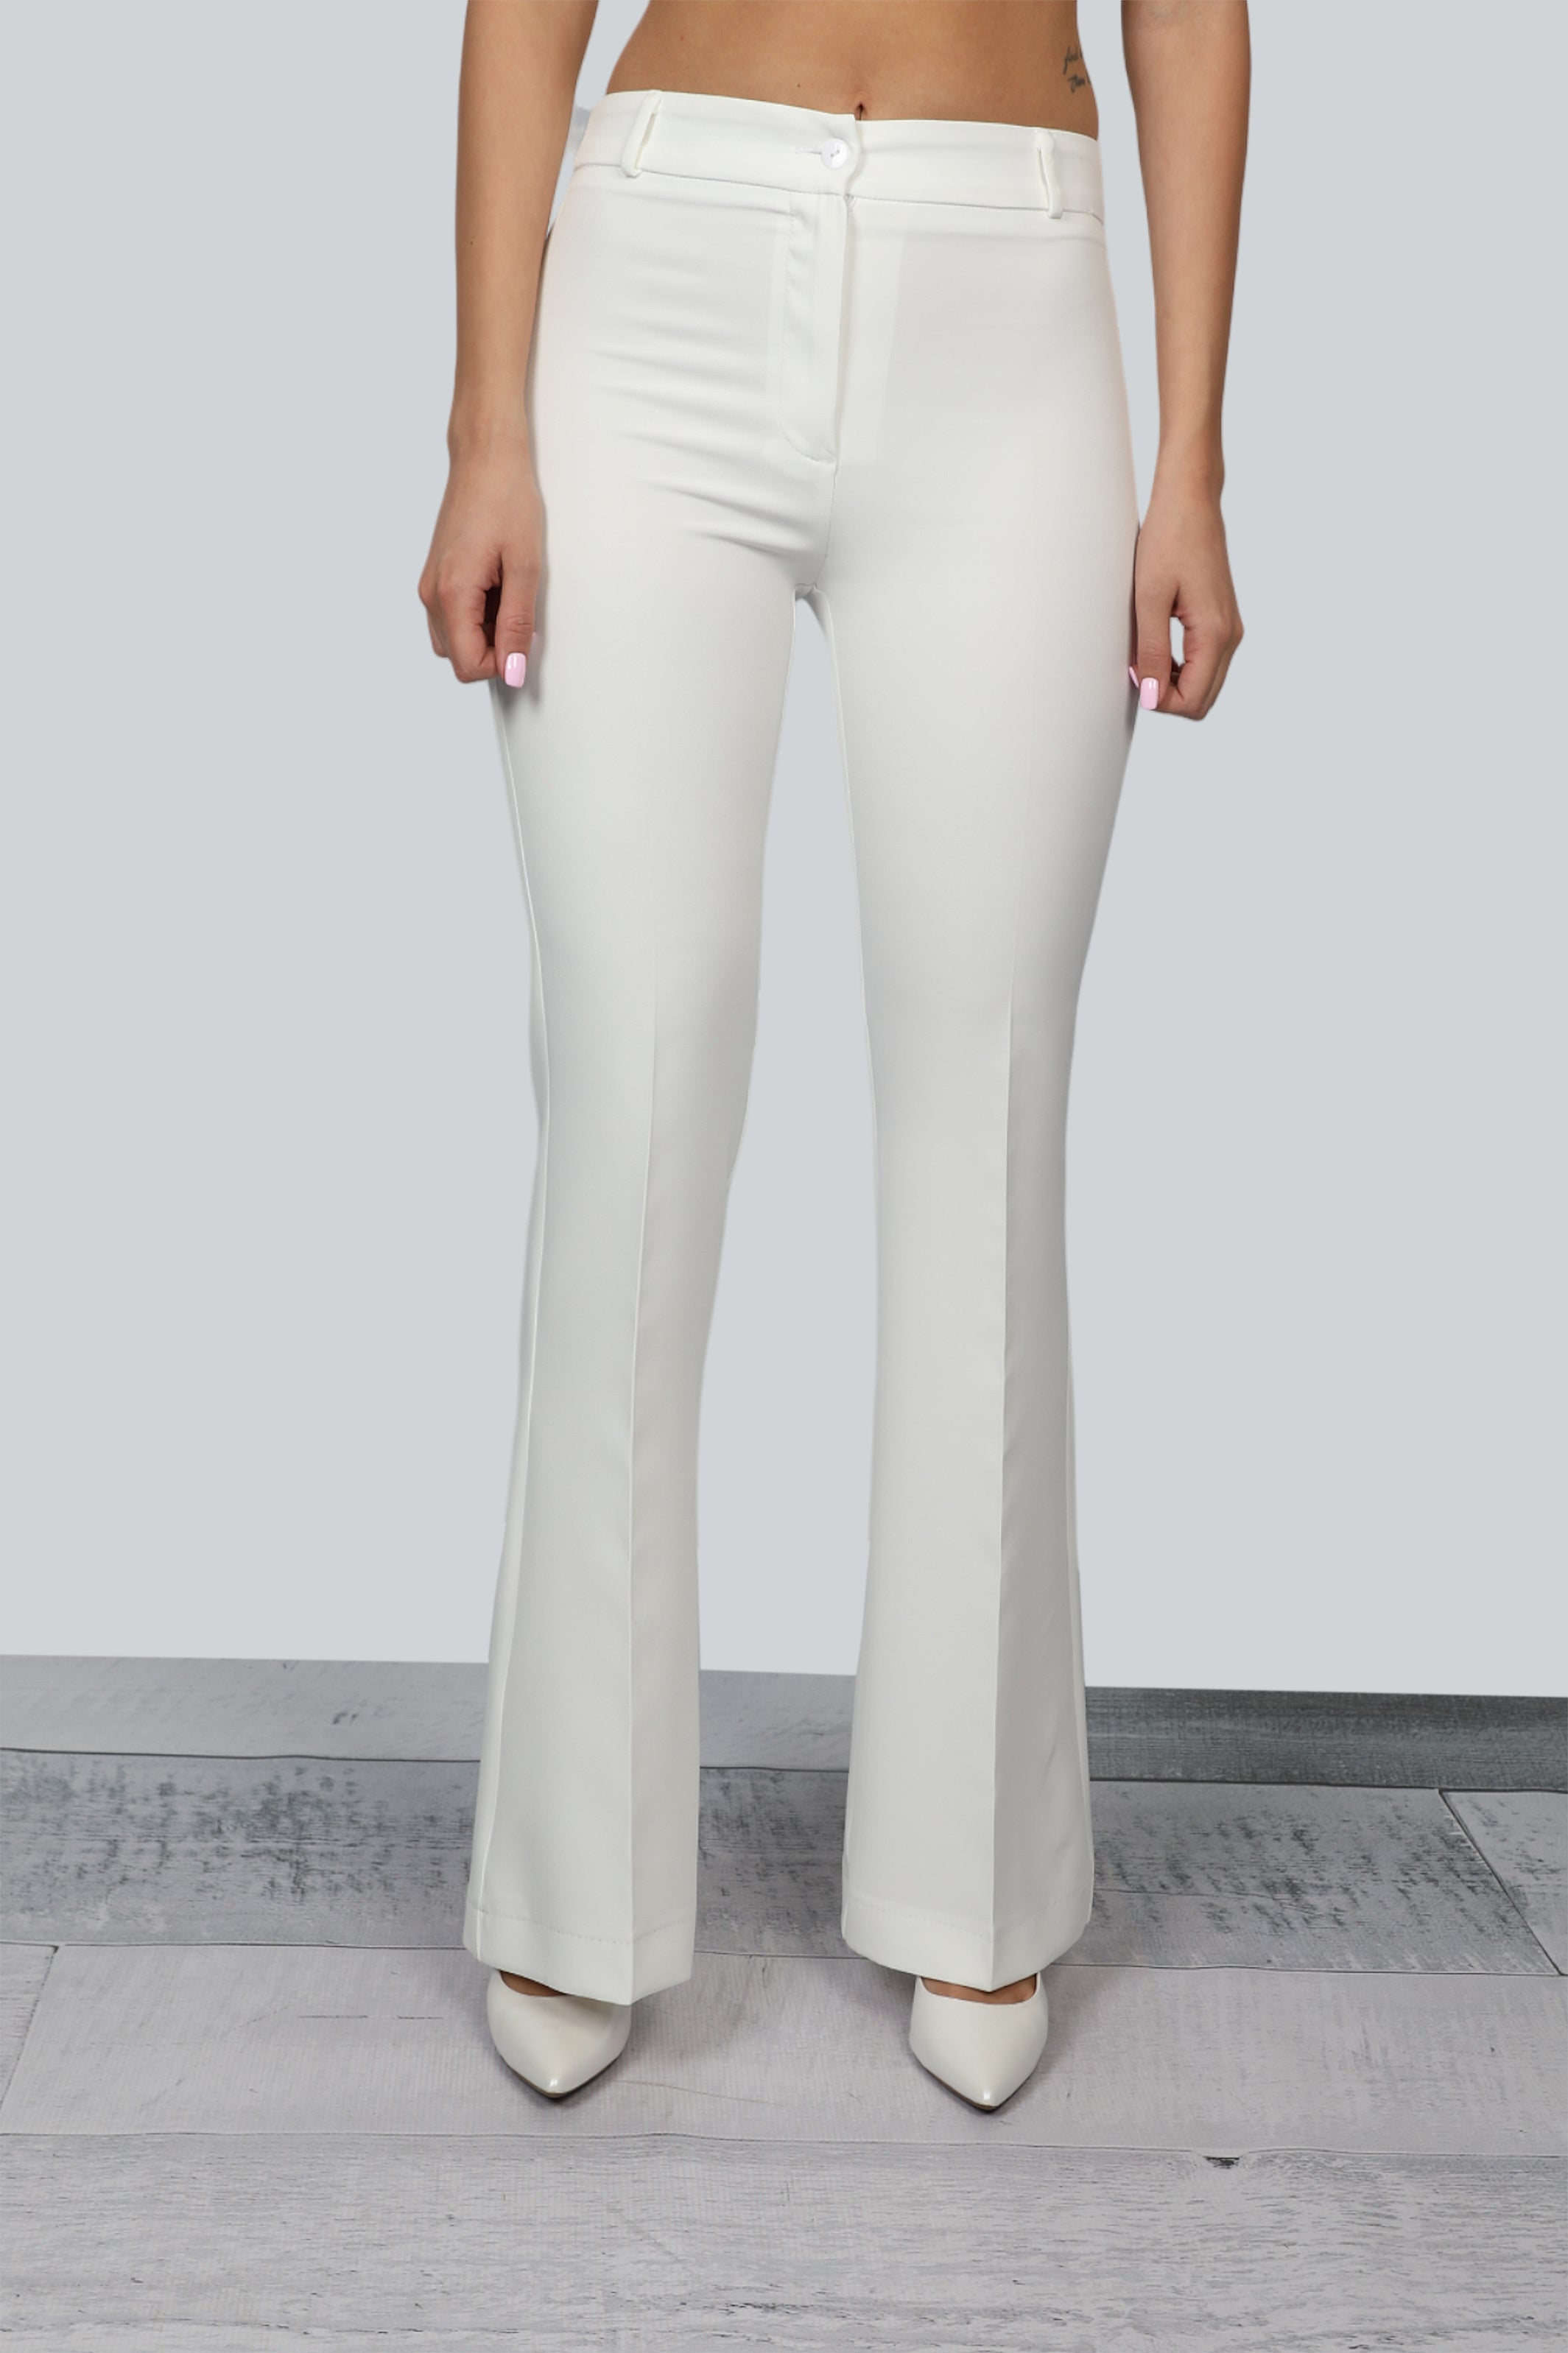 Classy Flare White Pants With Zipper To Close